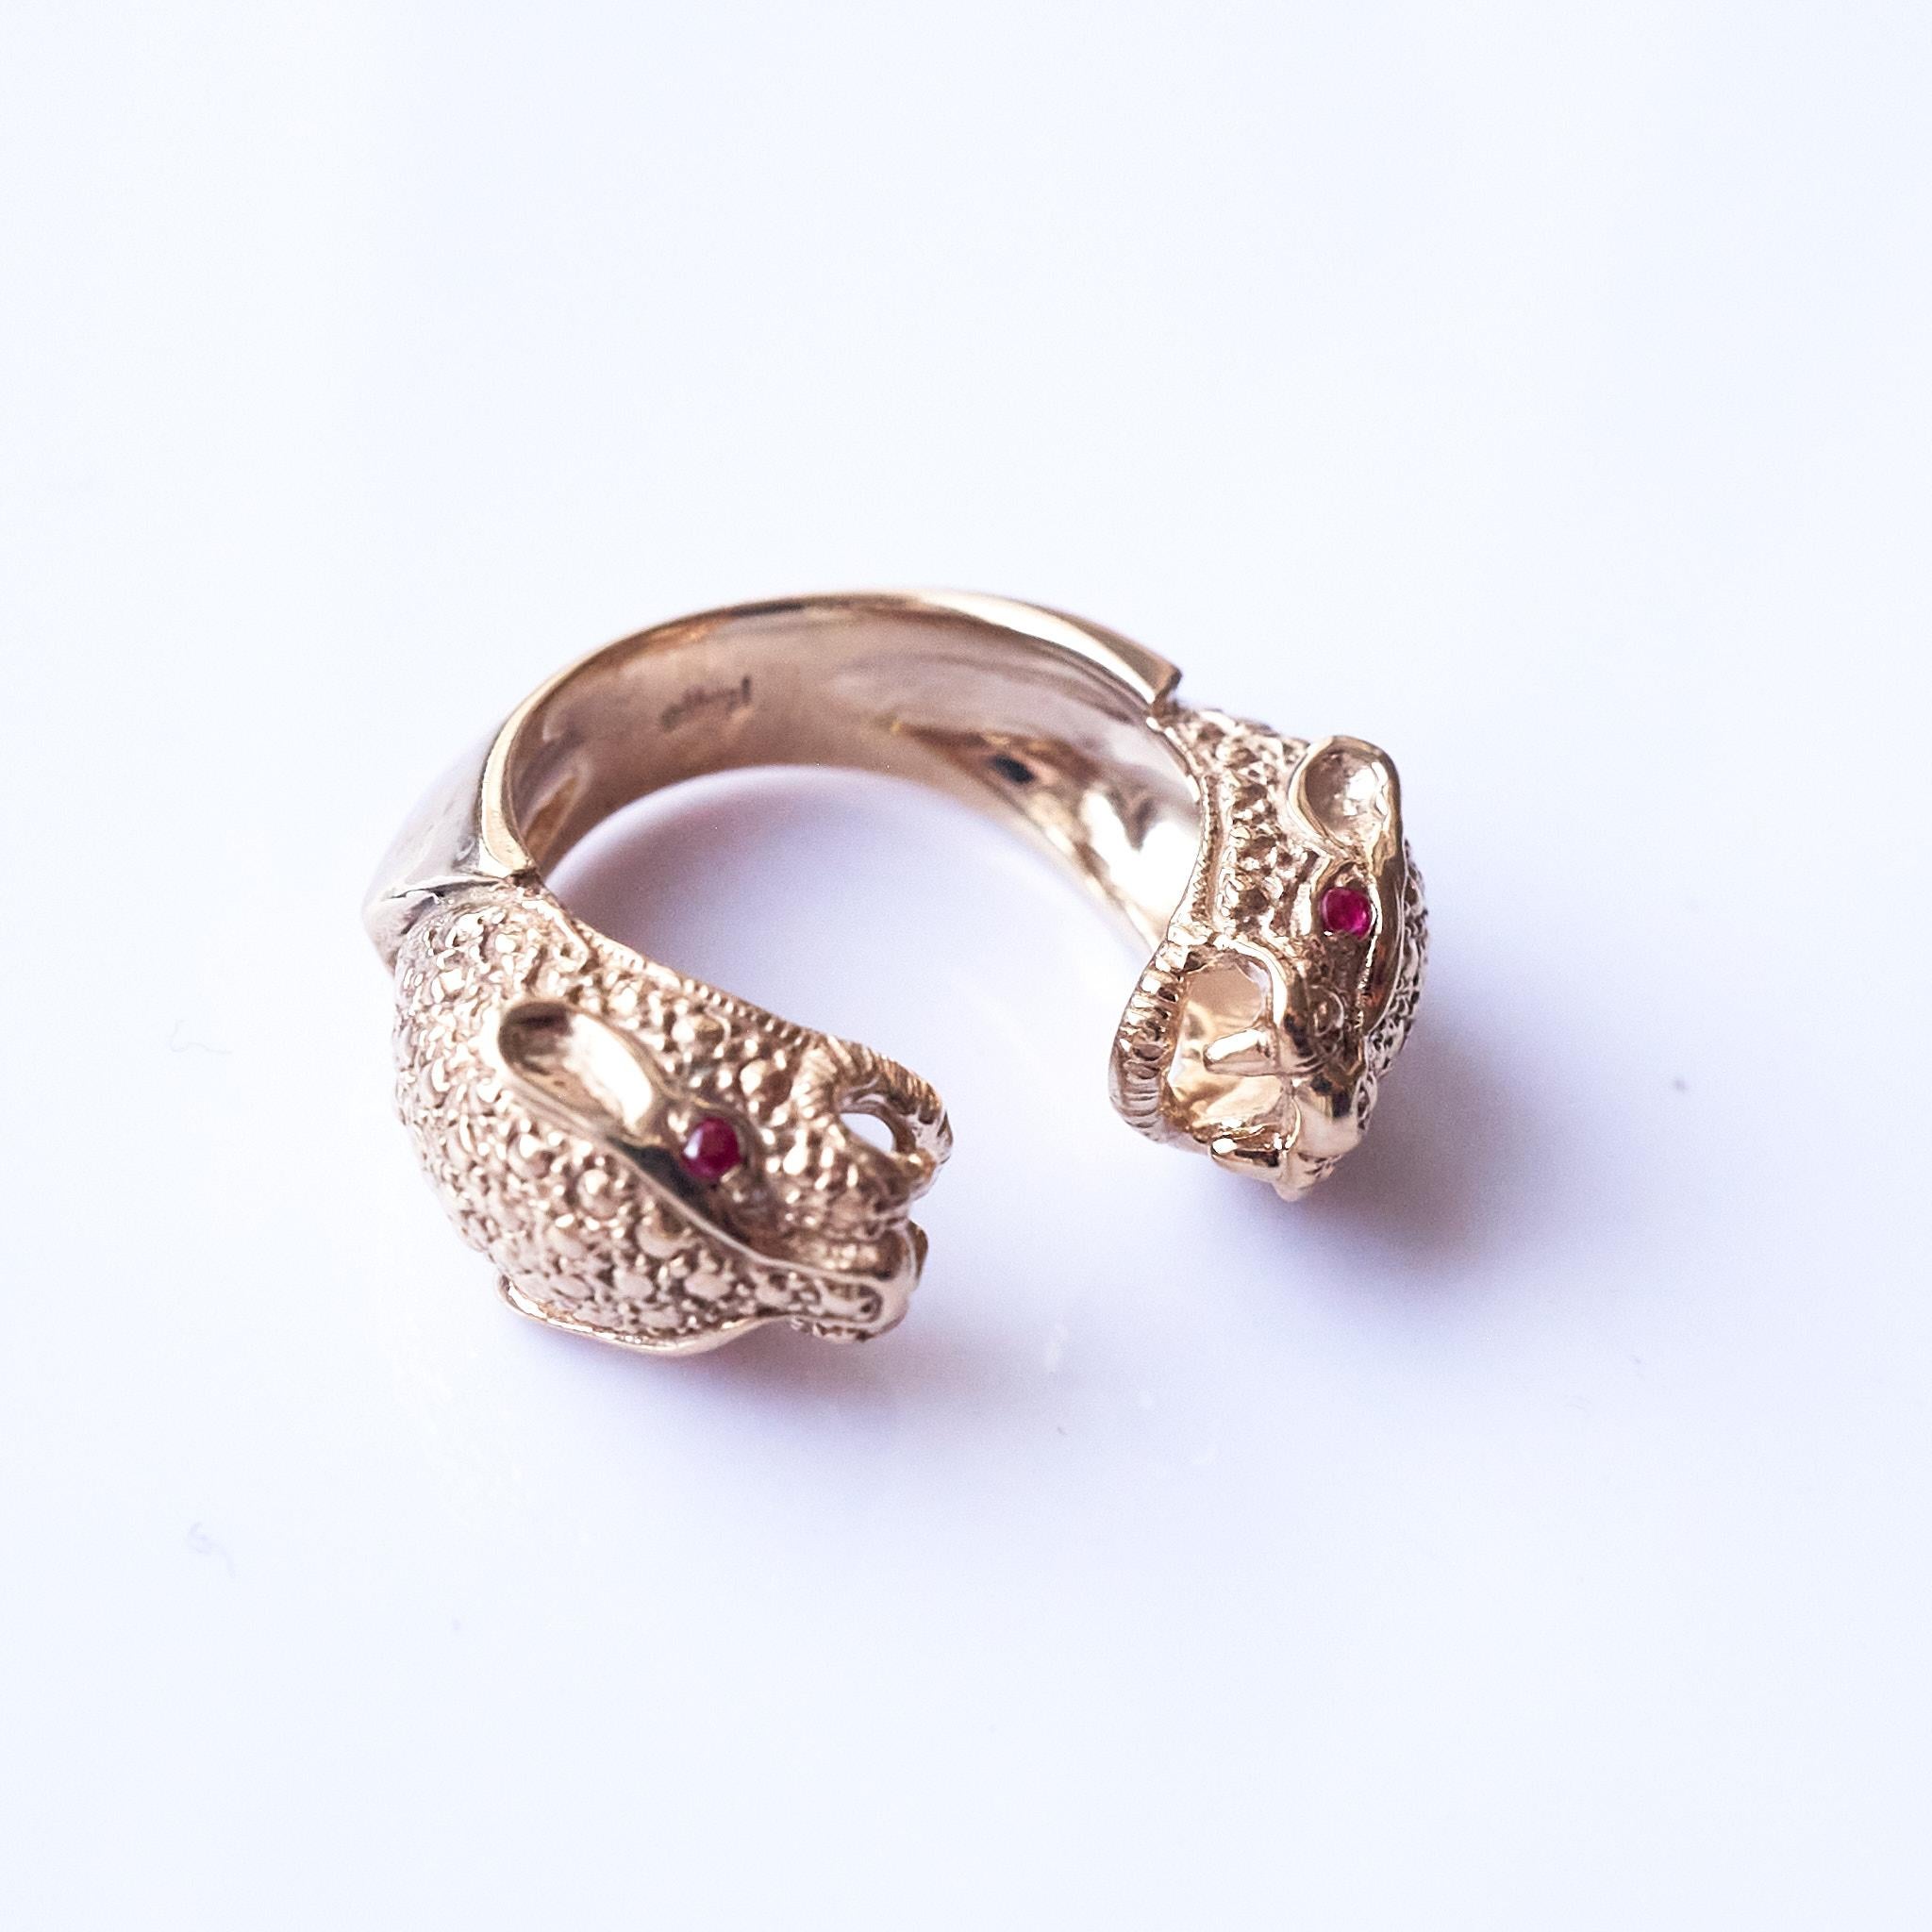 4 Pcs Ruby Jaguar Ring 18 Carat Gold Animal Jewelry Cocktail Ring J Dauphin

Made in Los Angeles

This Ring is made to order in once size, can be made in Rose or White Gold as well

Made to order 2-4 Weeks